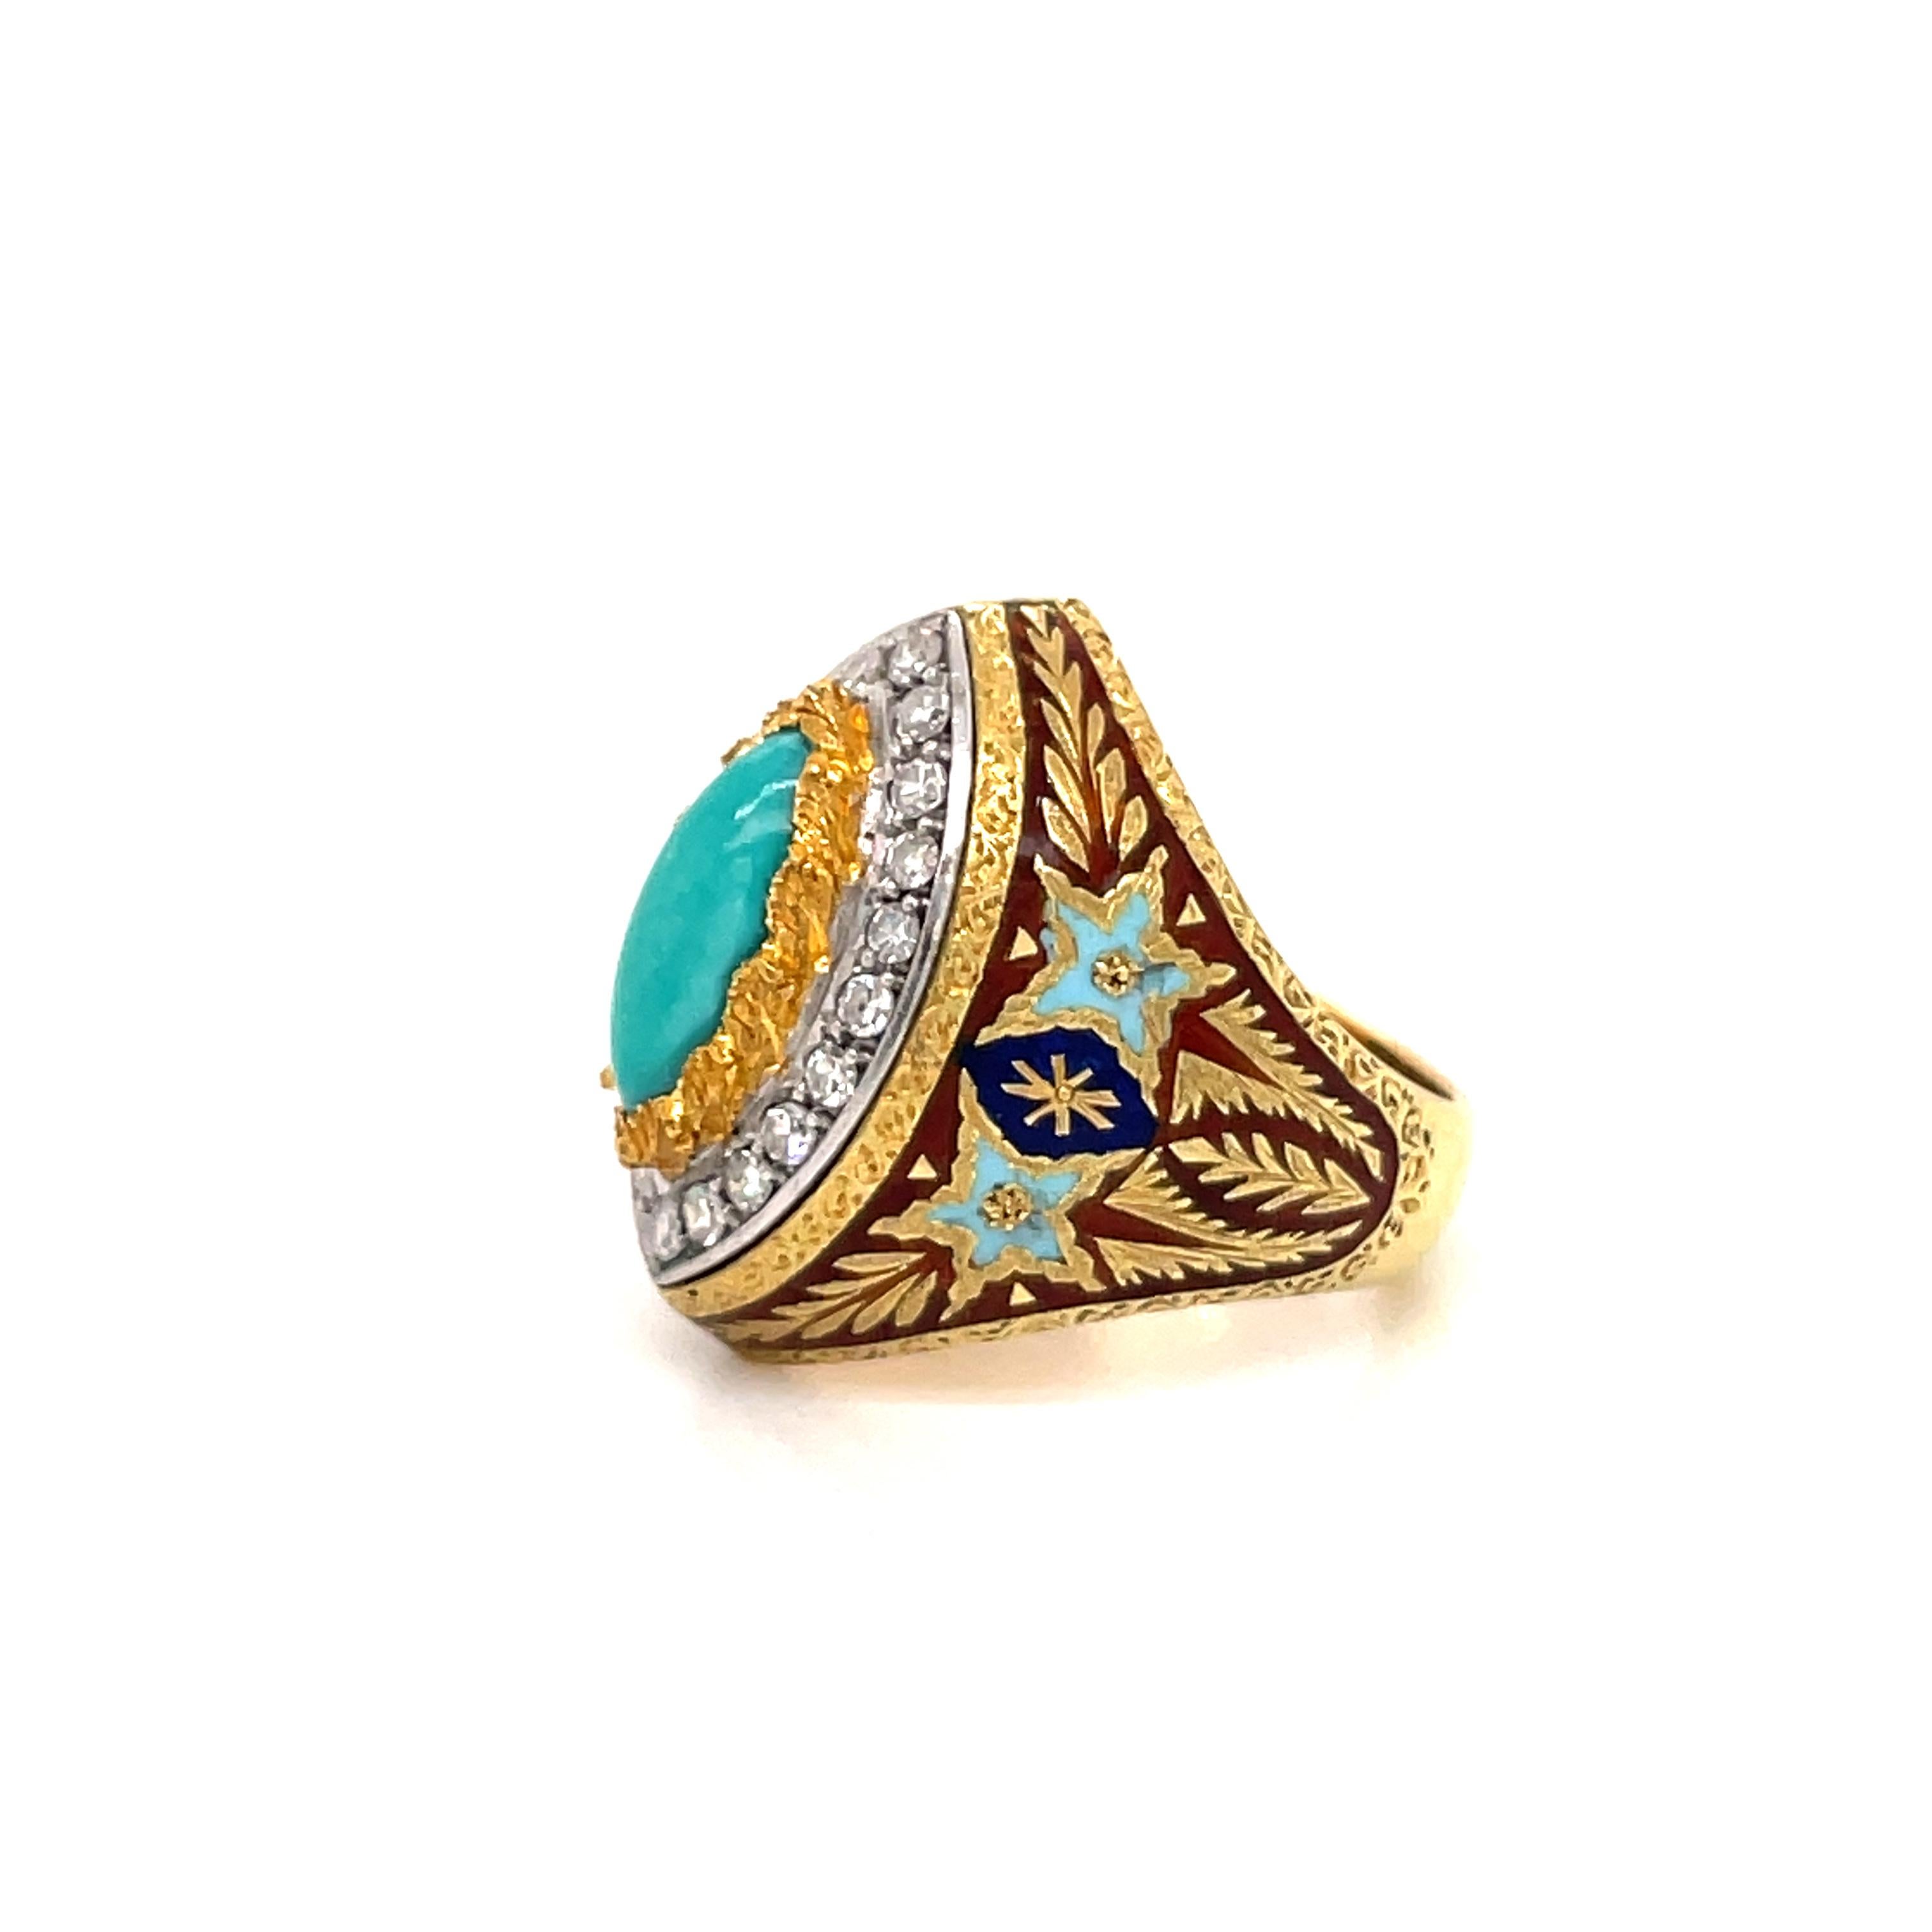 Mixed Cut Cazzaniga Rome Diamond Turquoise Enamel Gold Engraved Ring For Sale